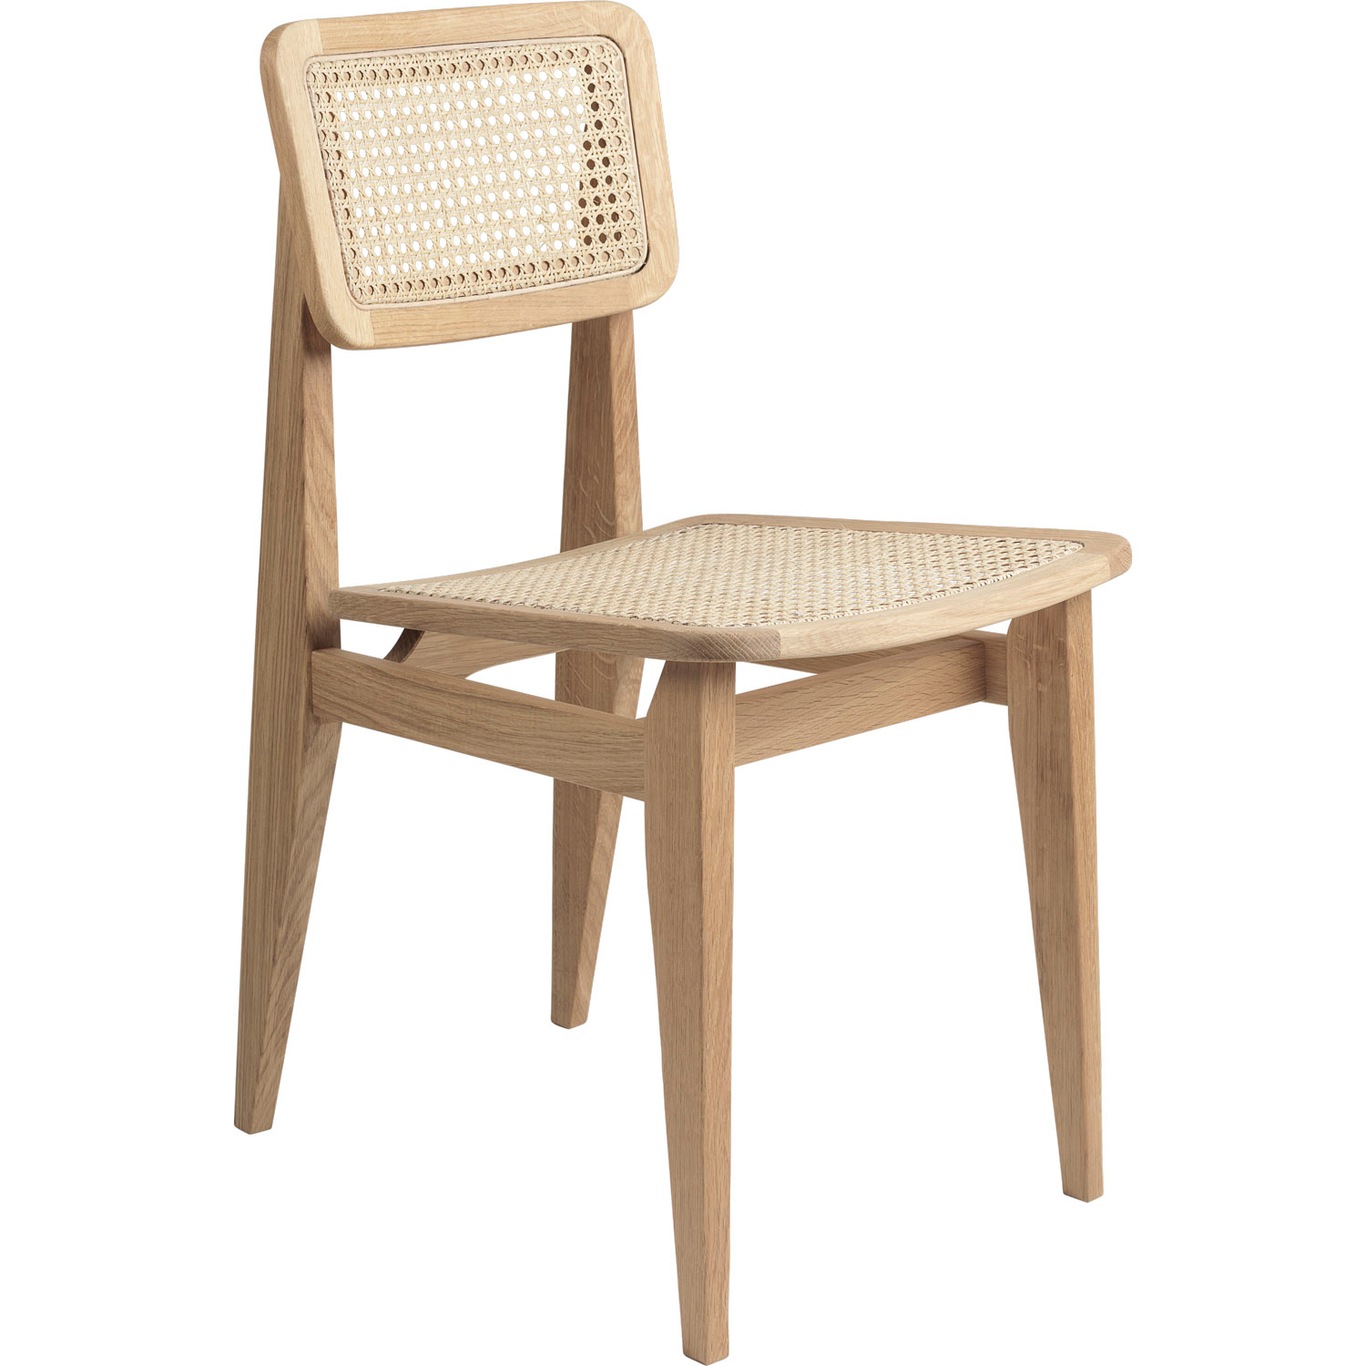 C-Chair Dining Chair, Cane